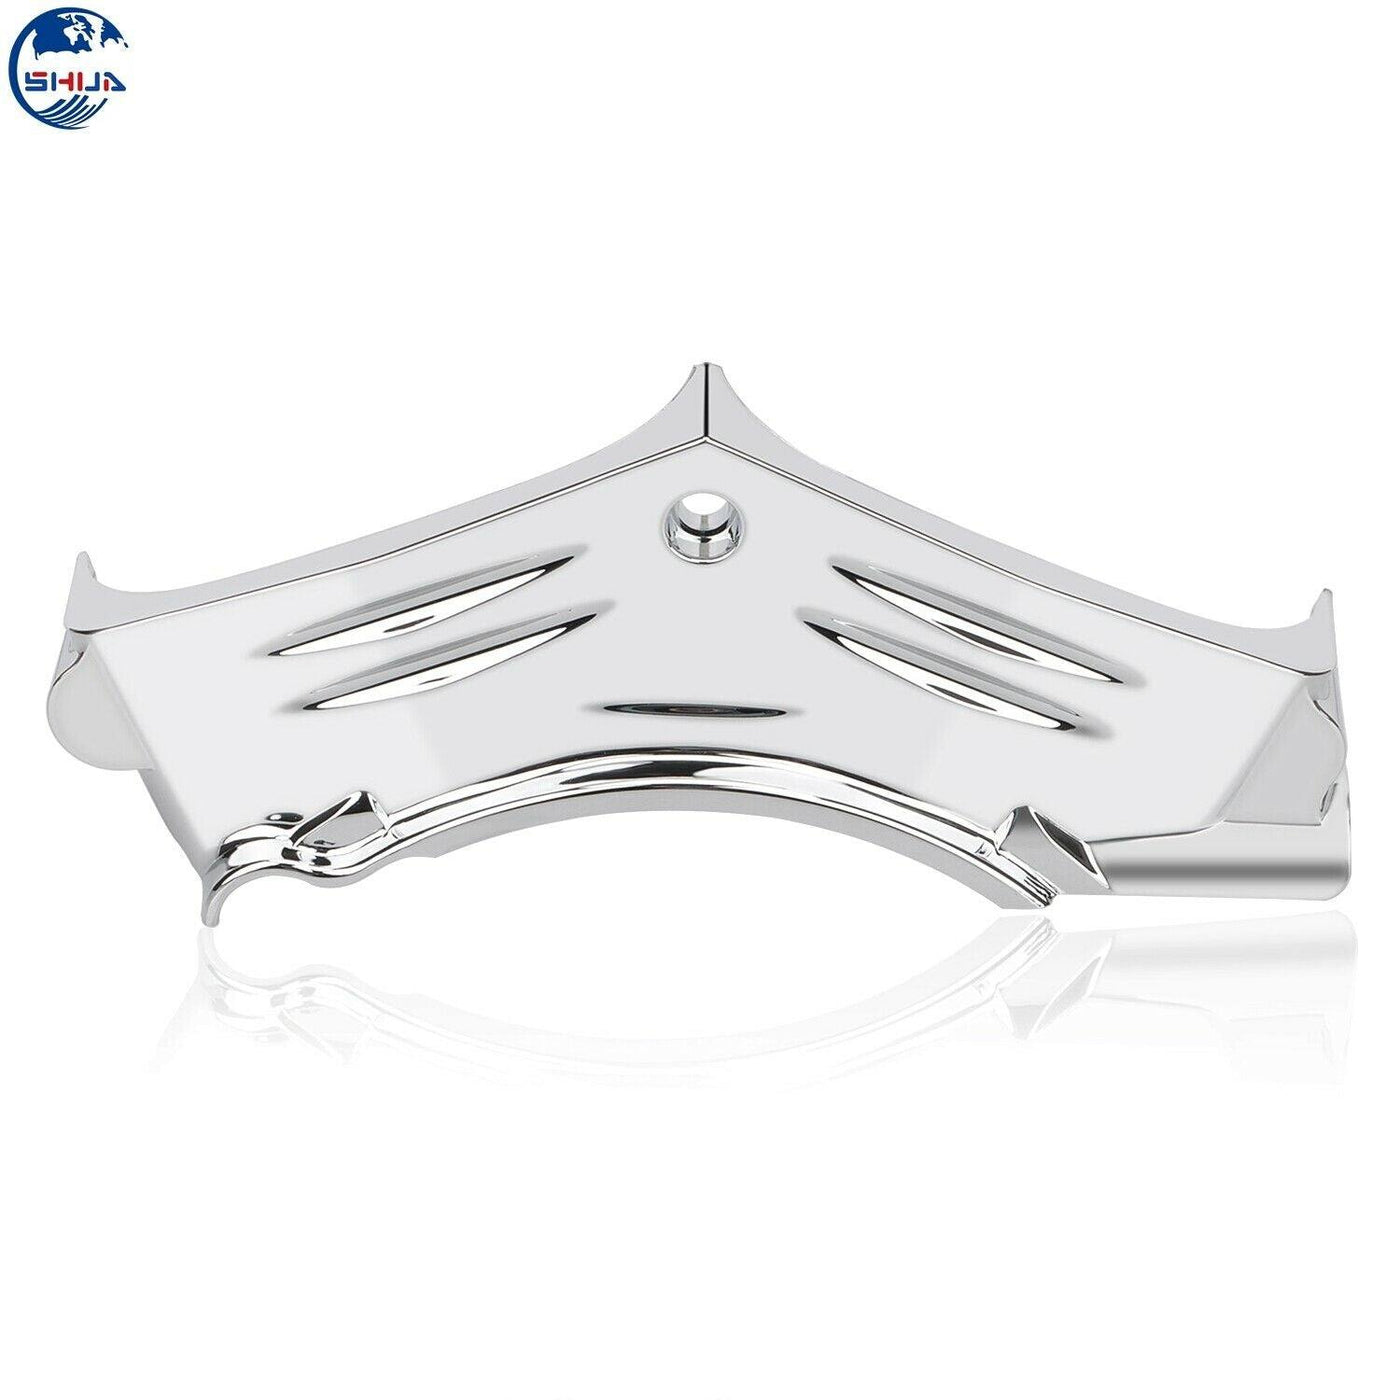 Chrome Cylinder Barrel Base Engine Block Cover Trim For Harley Road King Softail - Moto Life Products